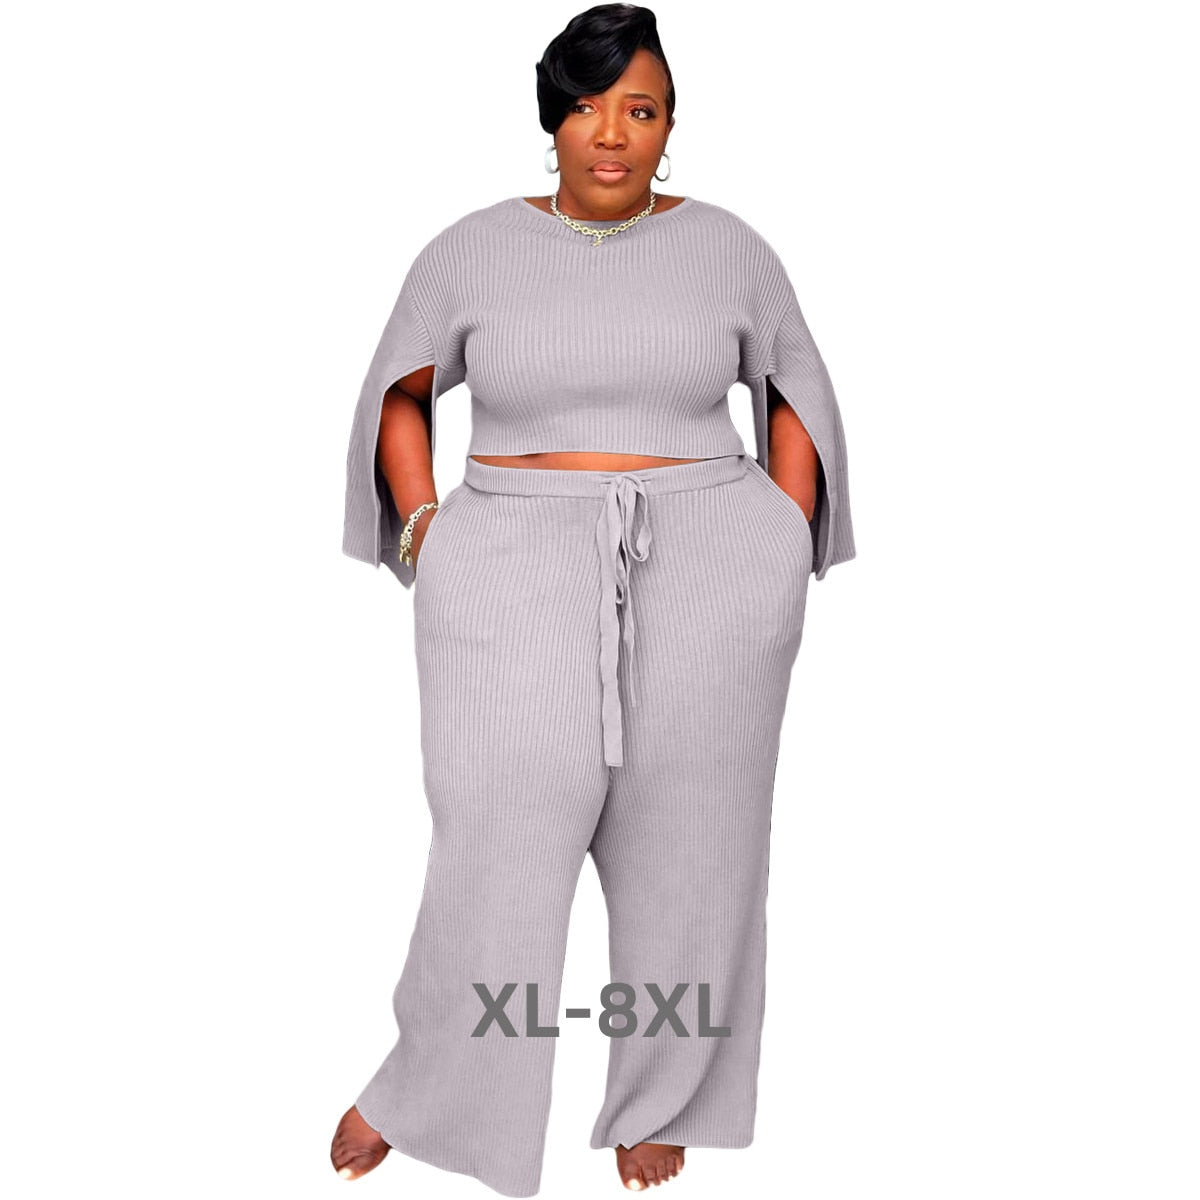 Aovica  Plus Size Fall Set Women Clothing Summer Fashion Casual Half Sleeve Top and Pants Two Piece Set Wholesale 3xl 4xl 5xl 6xl